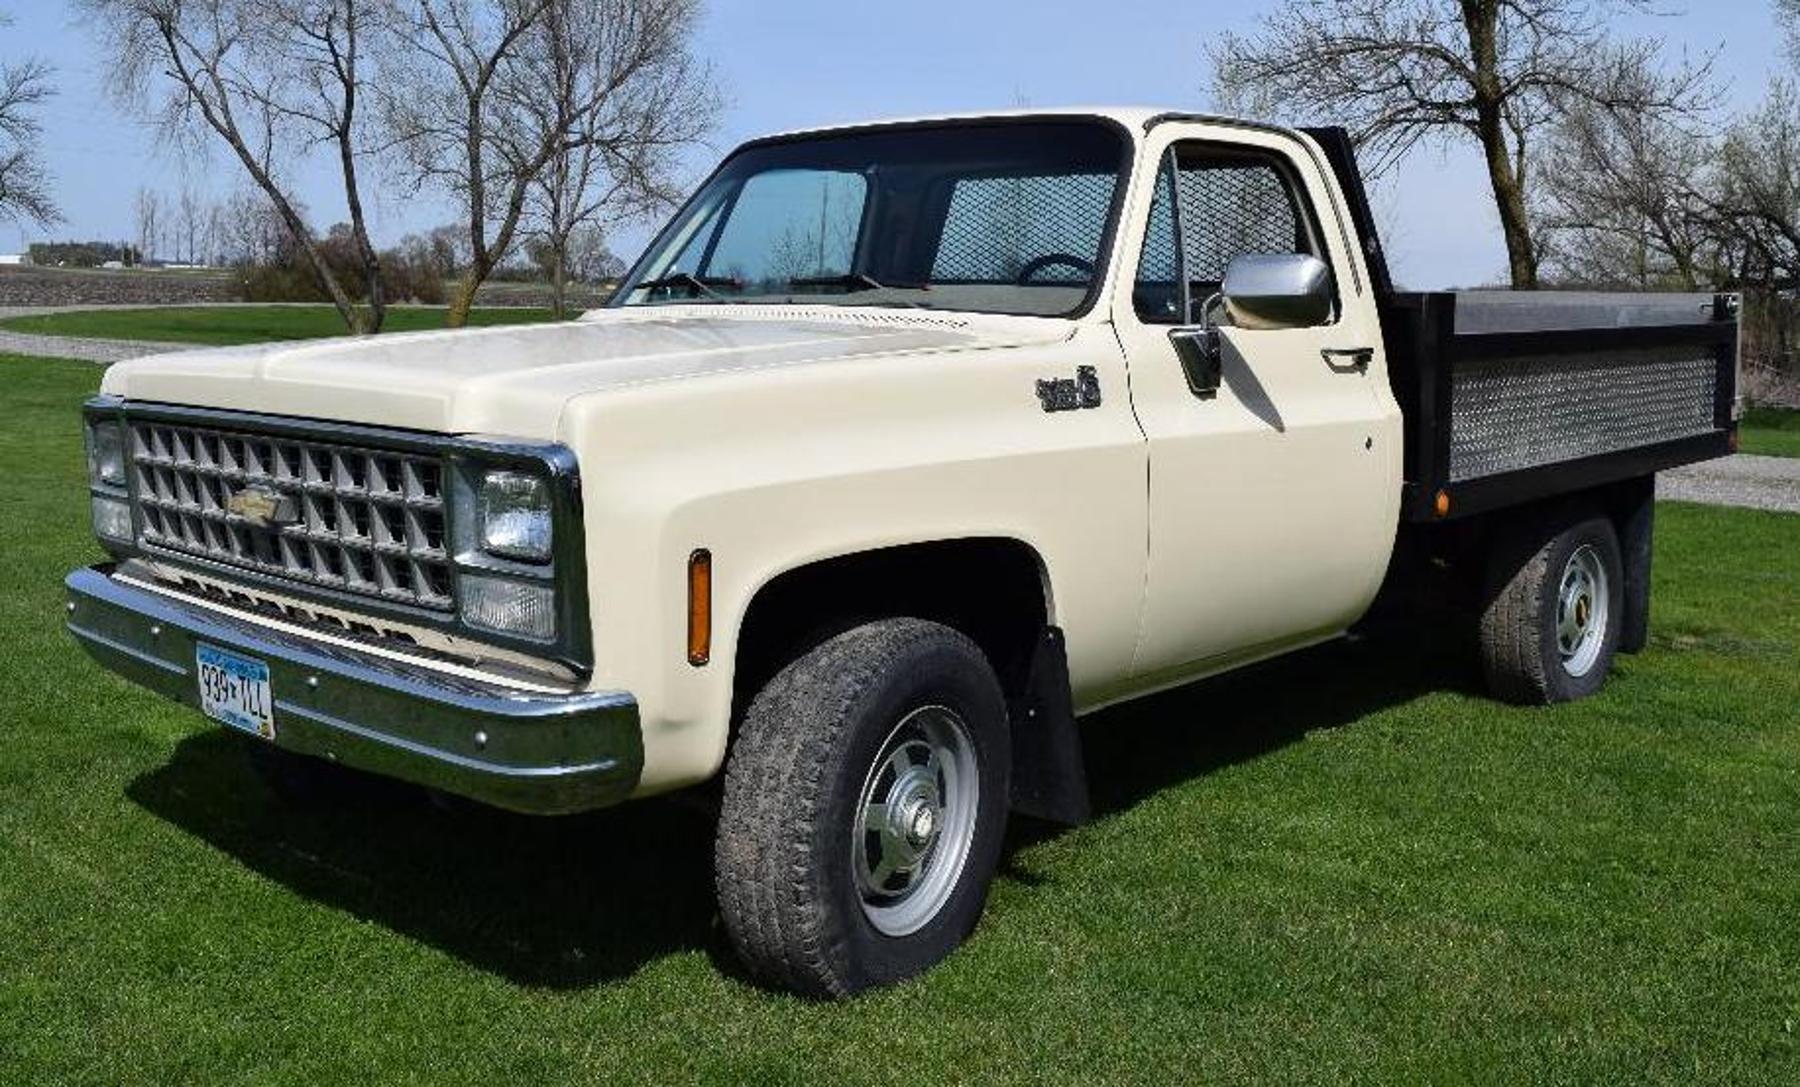 1980 Chevy K20, Lawn Care, Camping, Tools & More